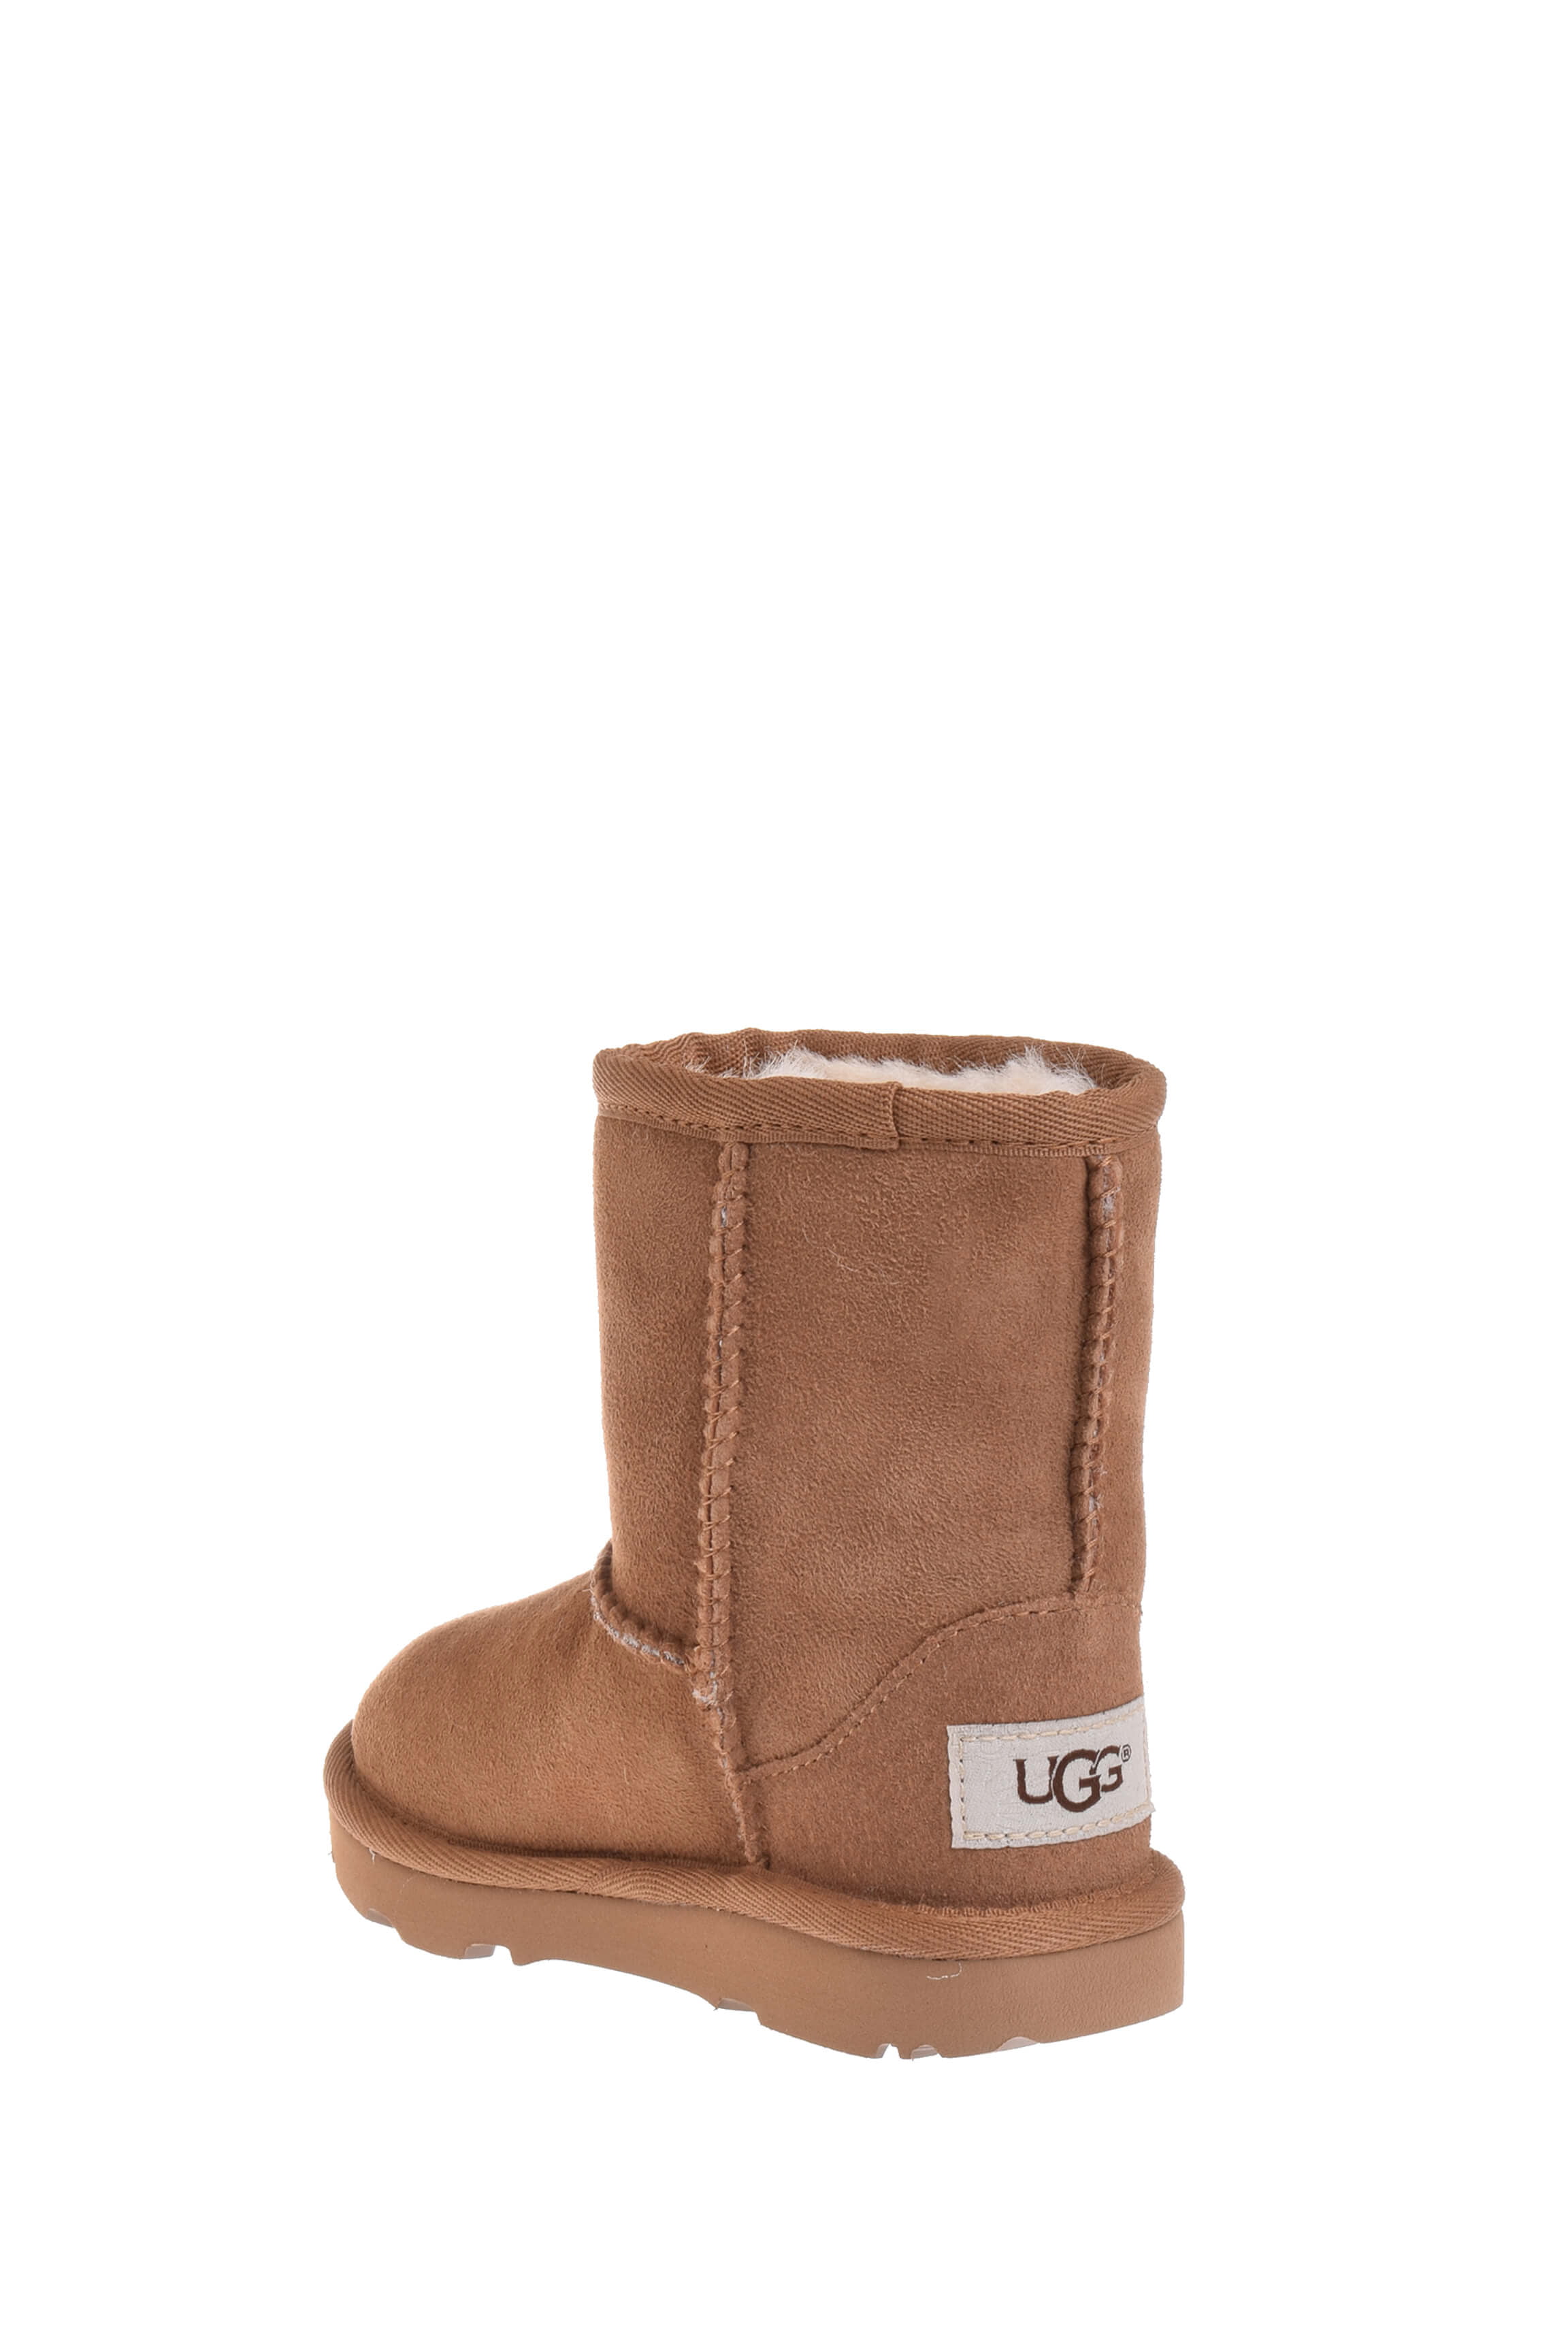 Infant UGG Classic II Toddlers Boot 